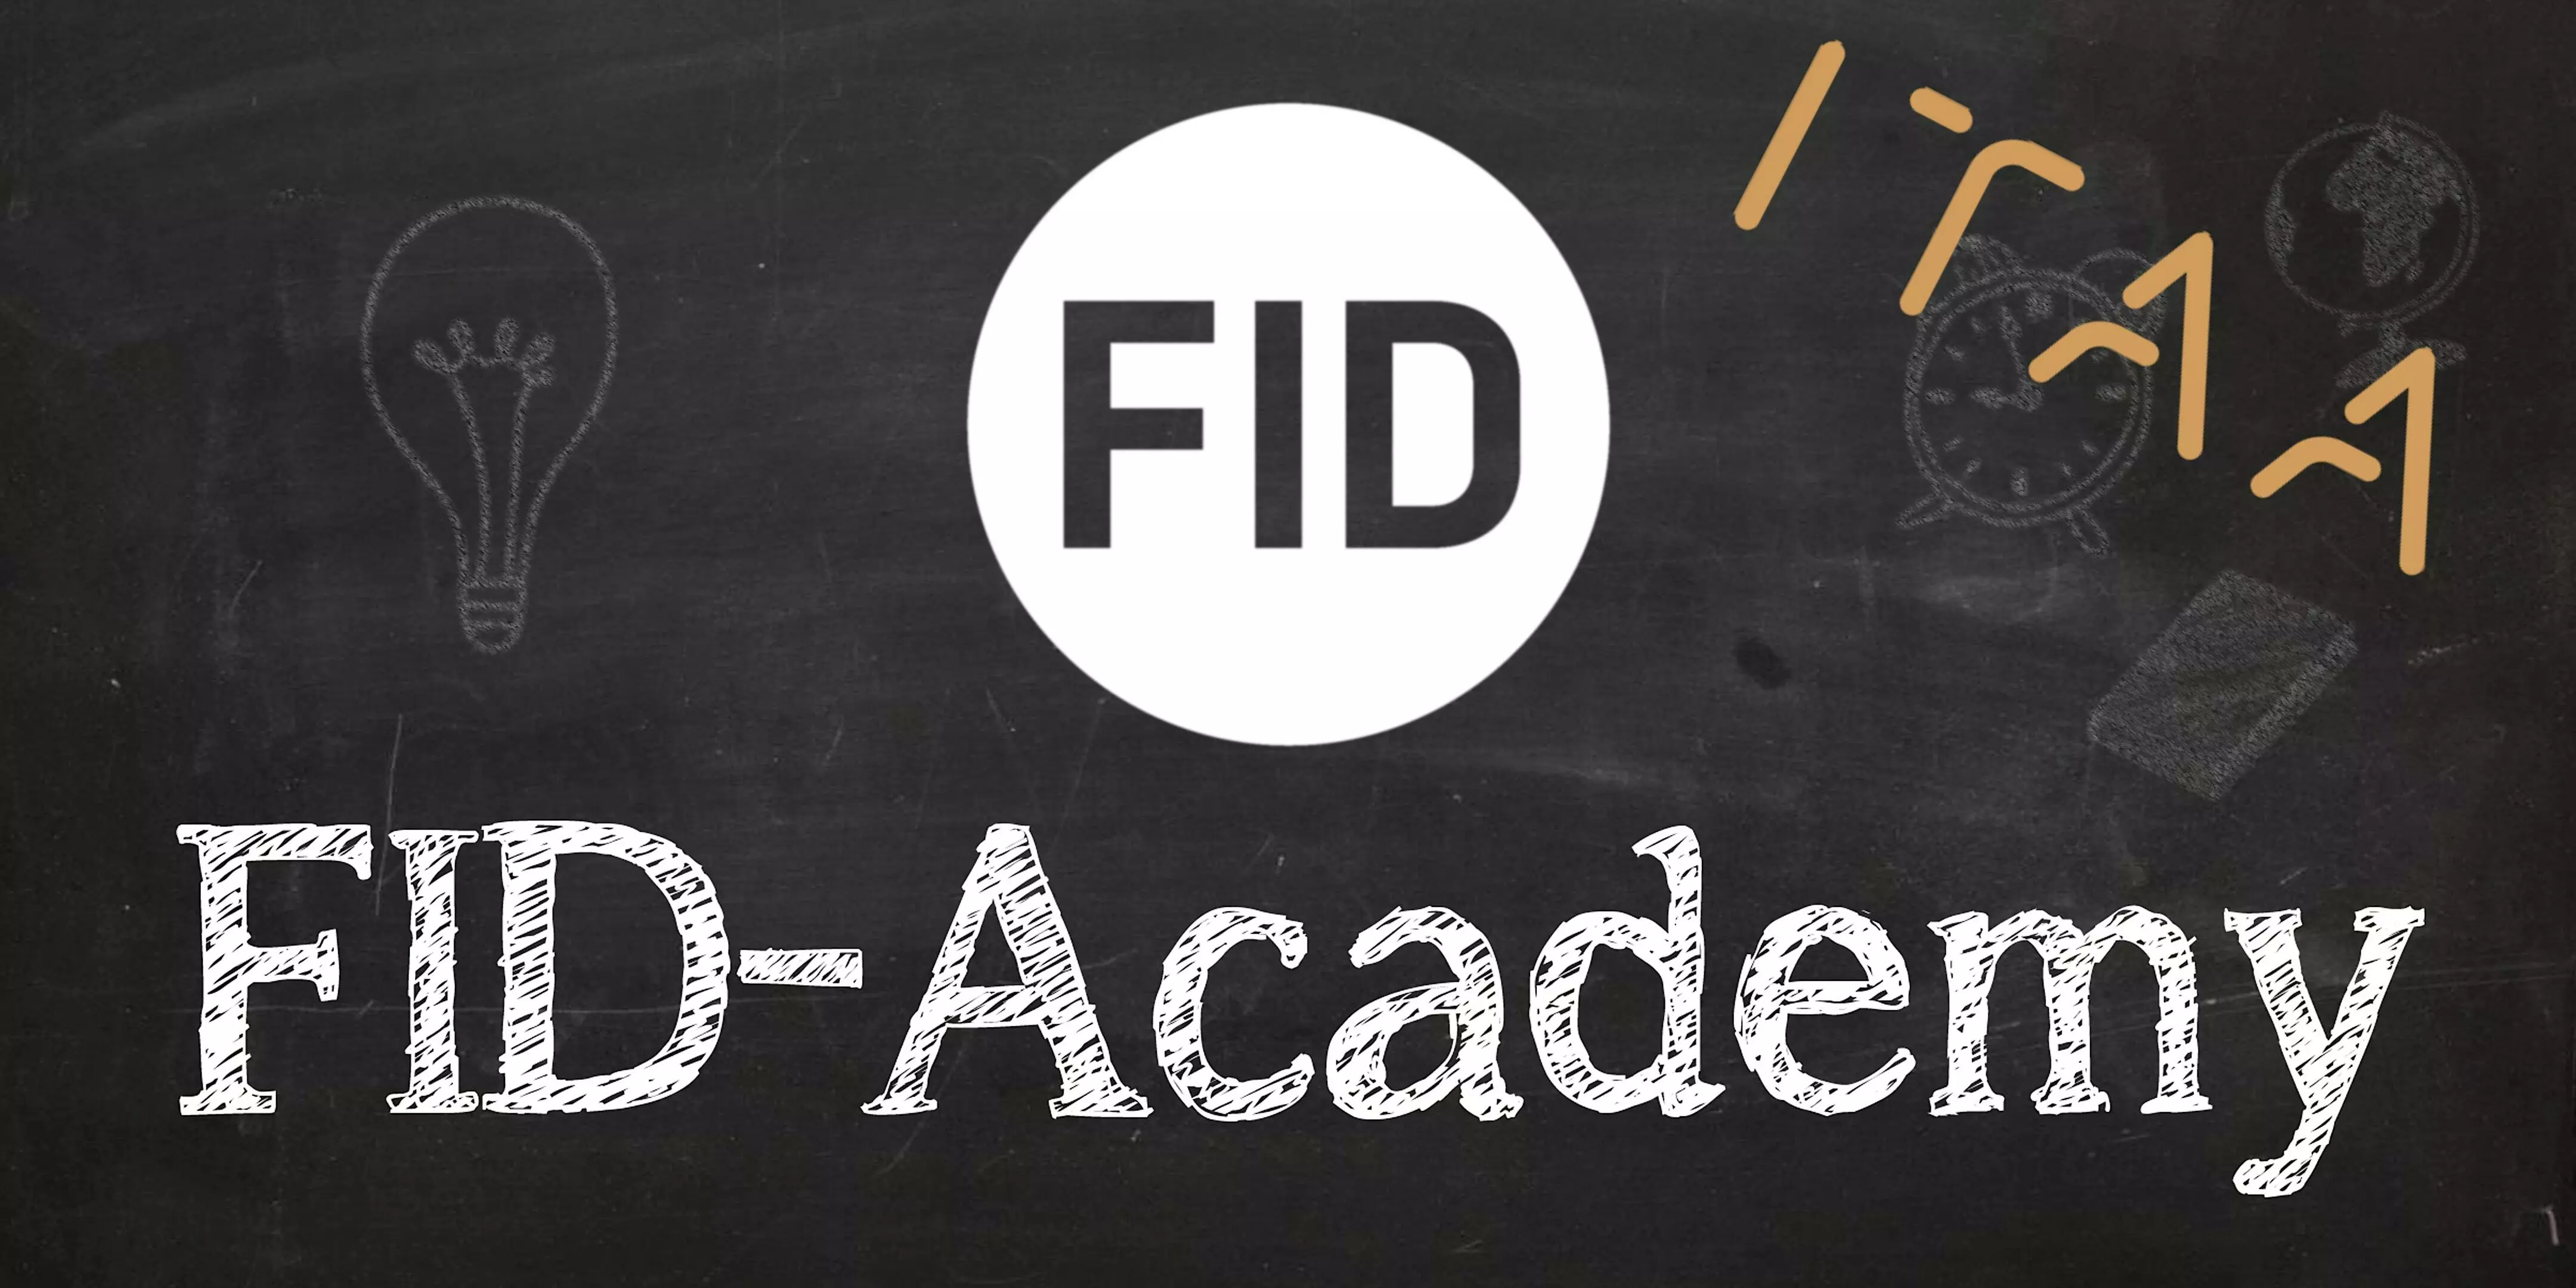 Gatherings-FID-Academy - Formation facturation (Waterloo)